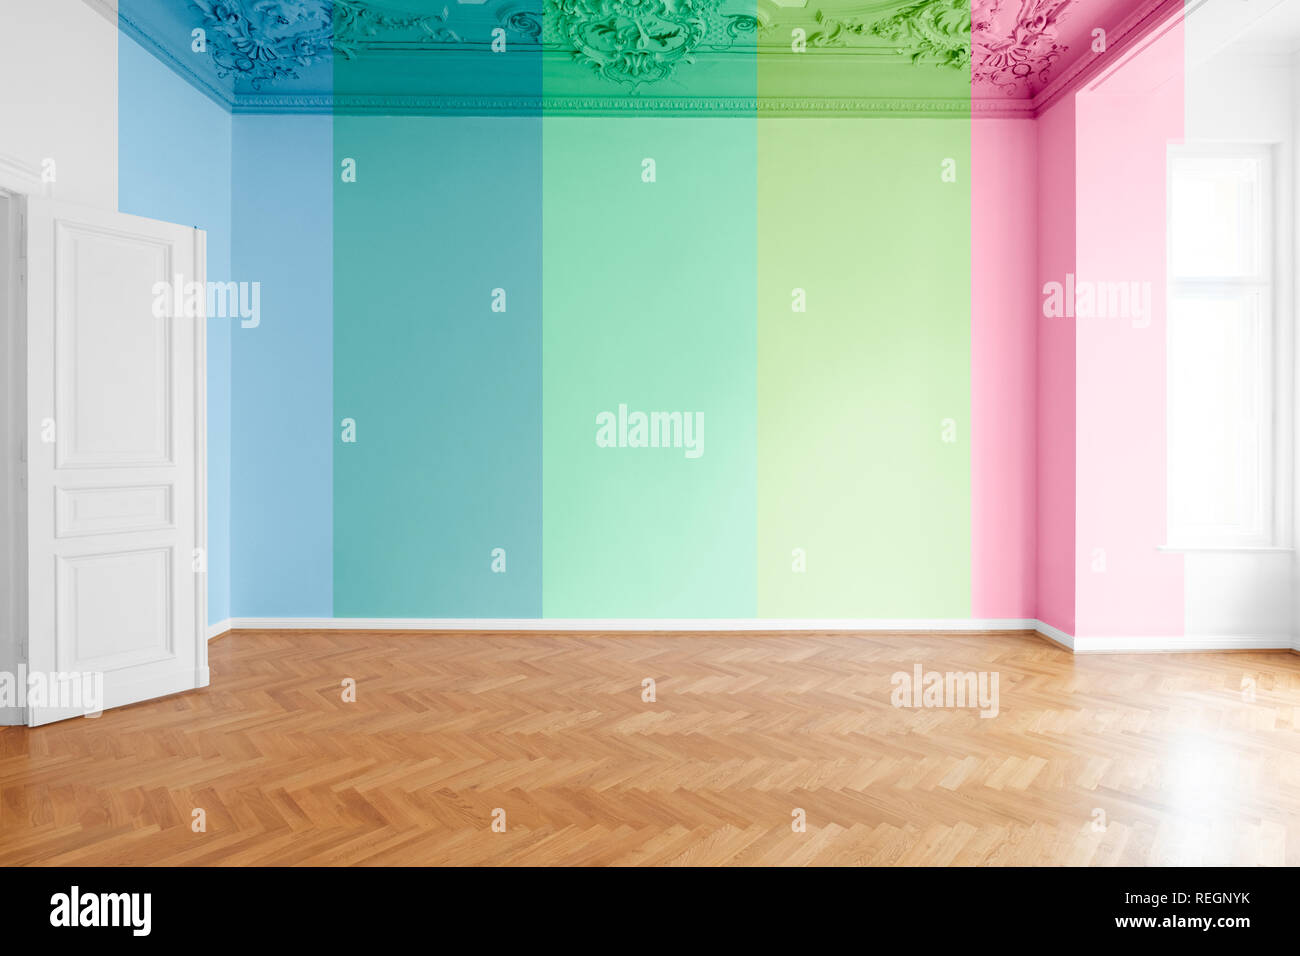 flat renovation concept, colored room with wall paint color variations Stock Photo